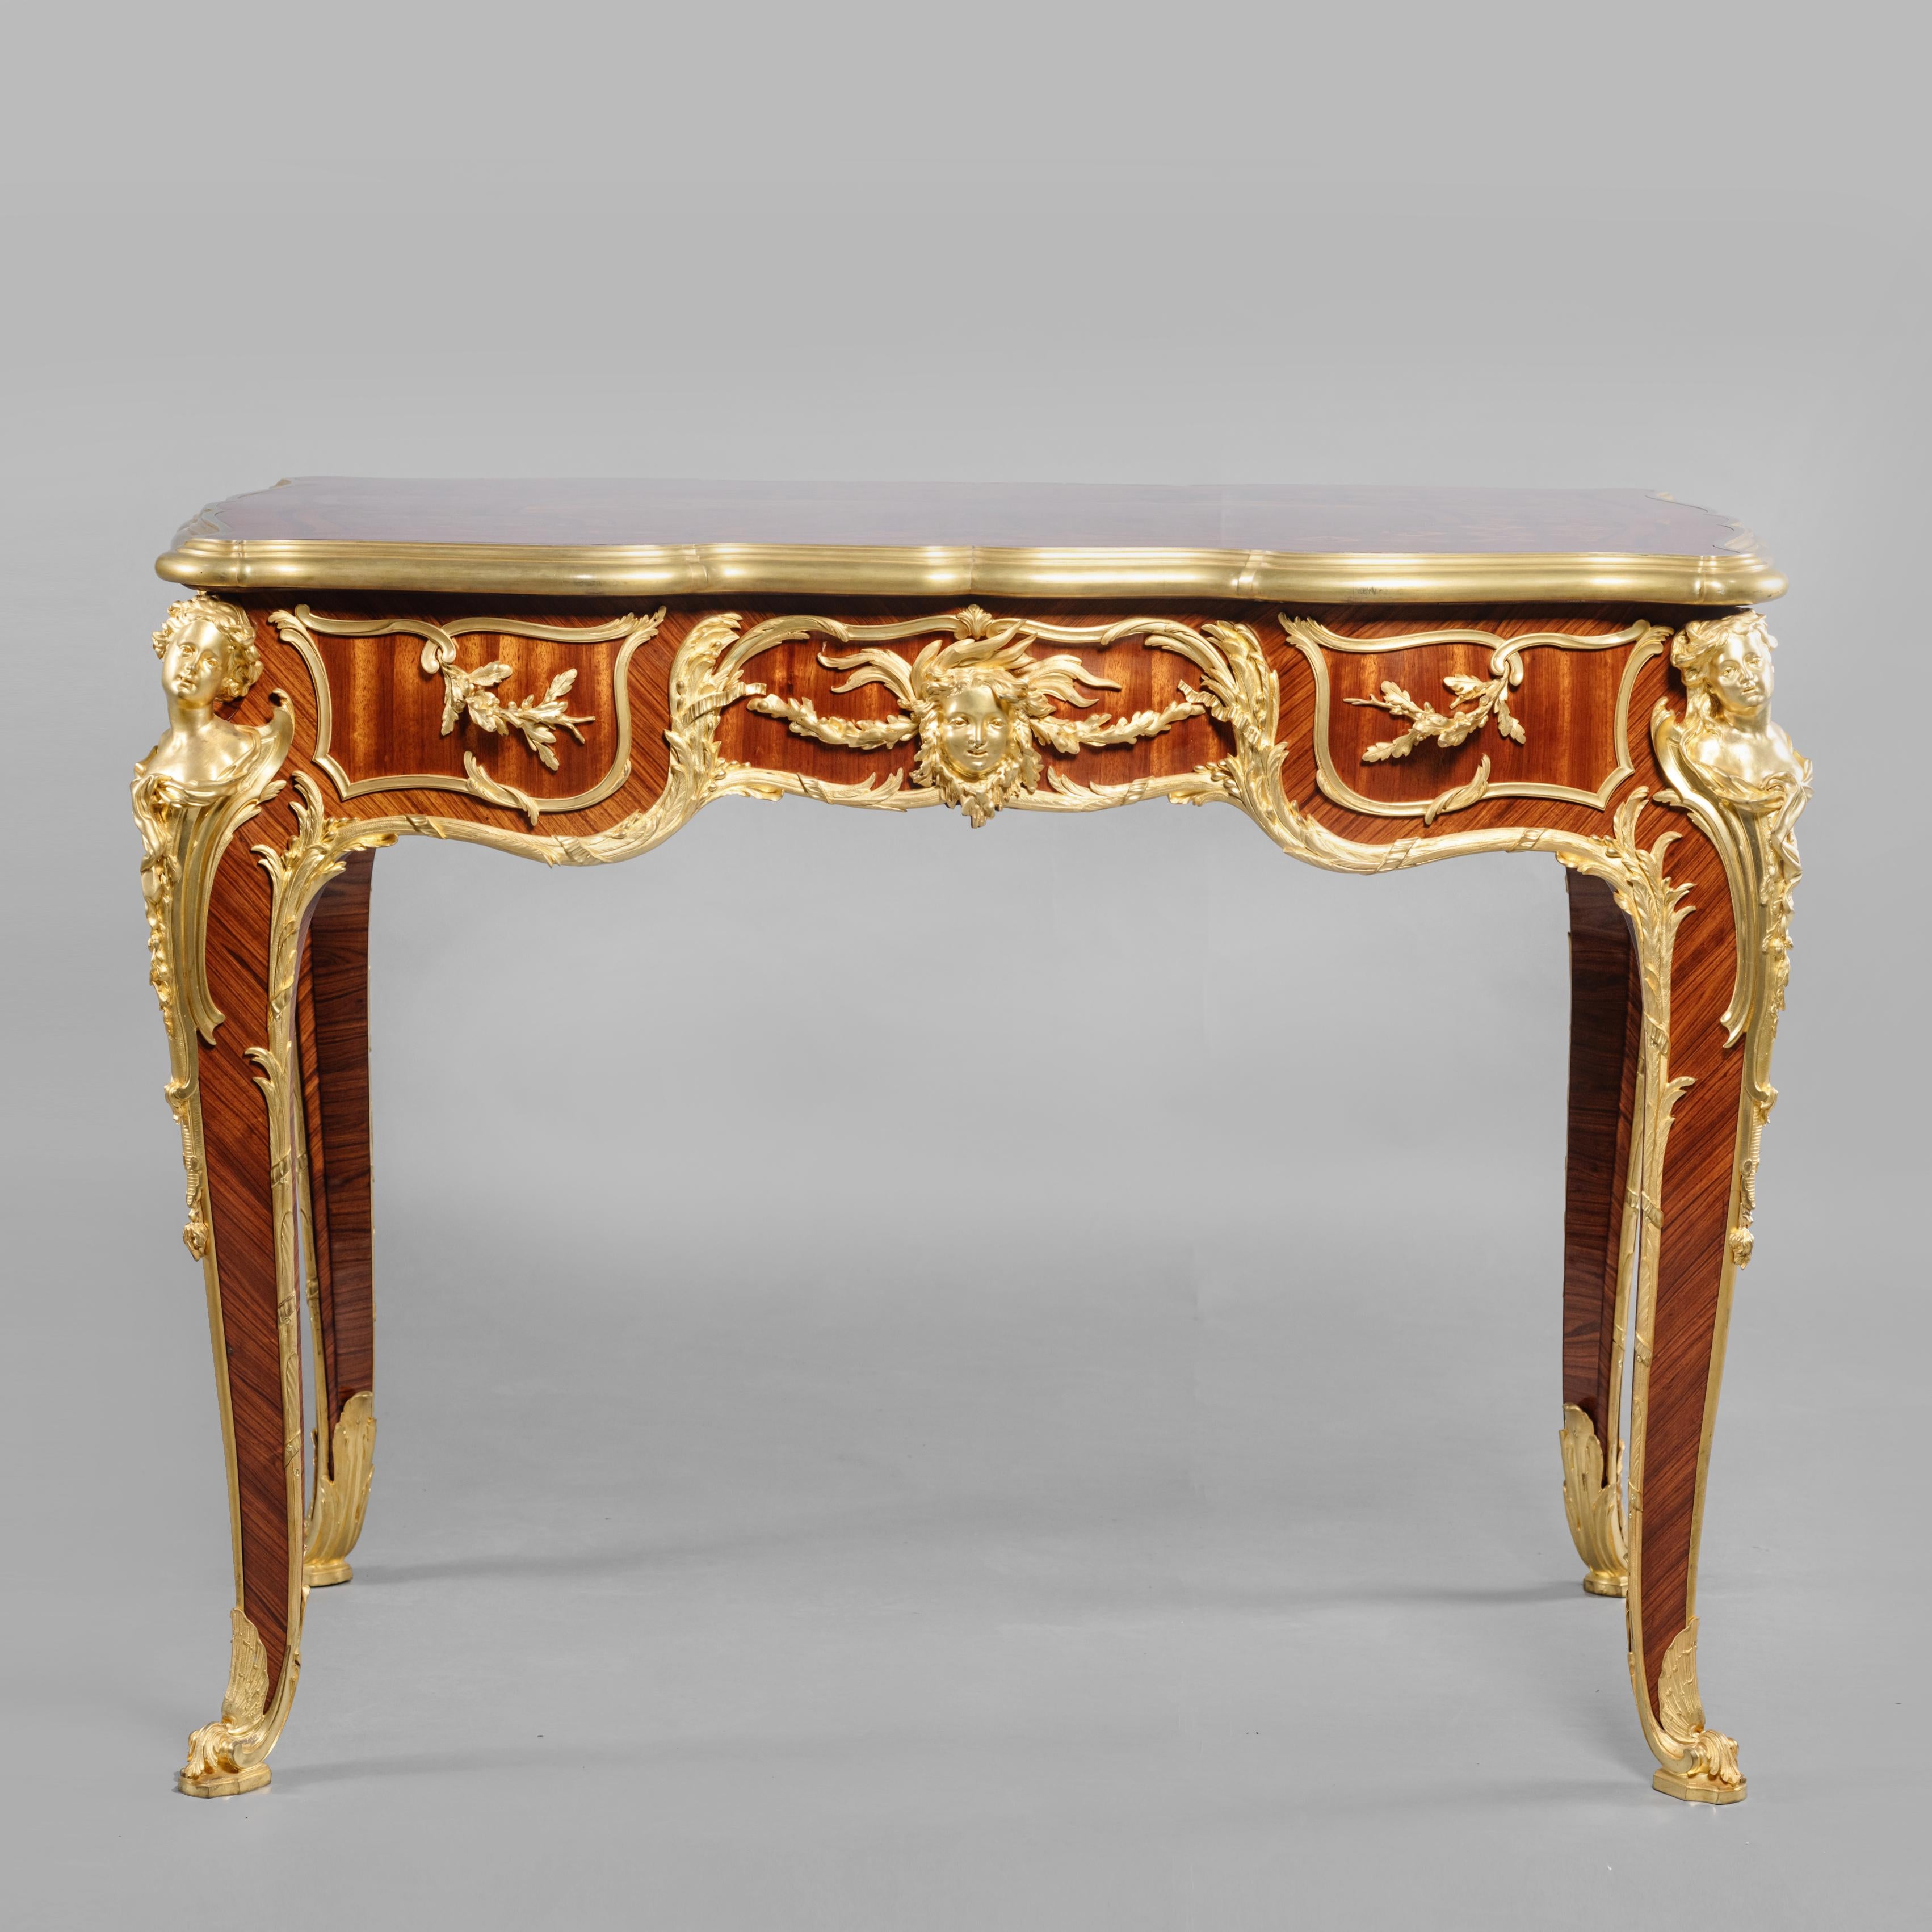 An Exceptionally Rare and Important Louis XV Style Gilt-Bronze Mounted Marquetry Inlaid Centre Table by François Linke, the Mounts Designed by Léon Messagé.
 
Linke Index No. 930. 
Signed 'Linke' to the upper bronze moulding.
Stamped 'FL' to the